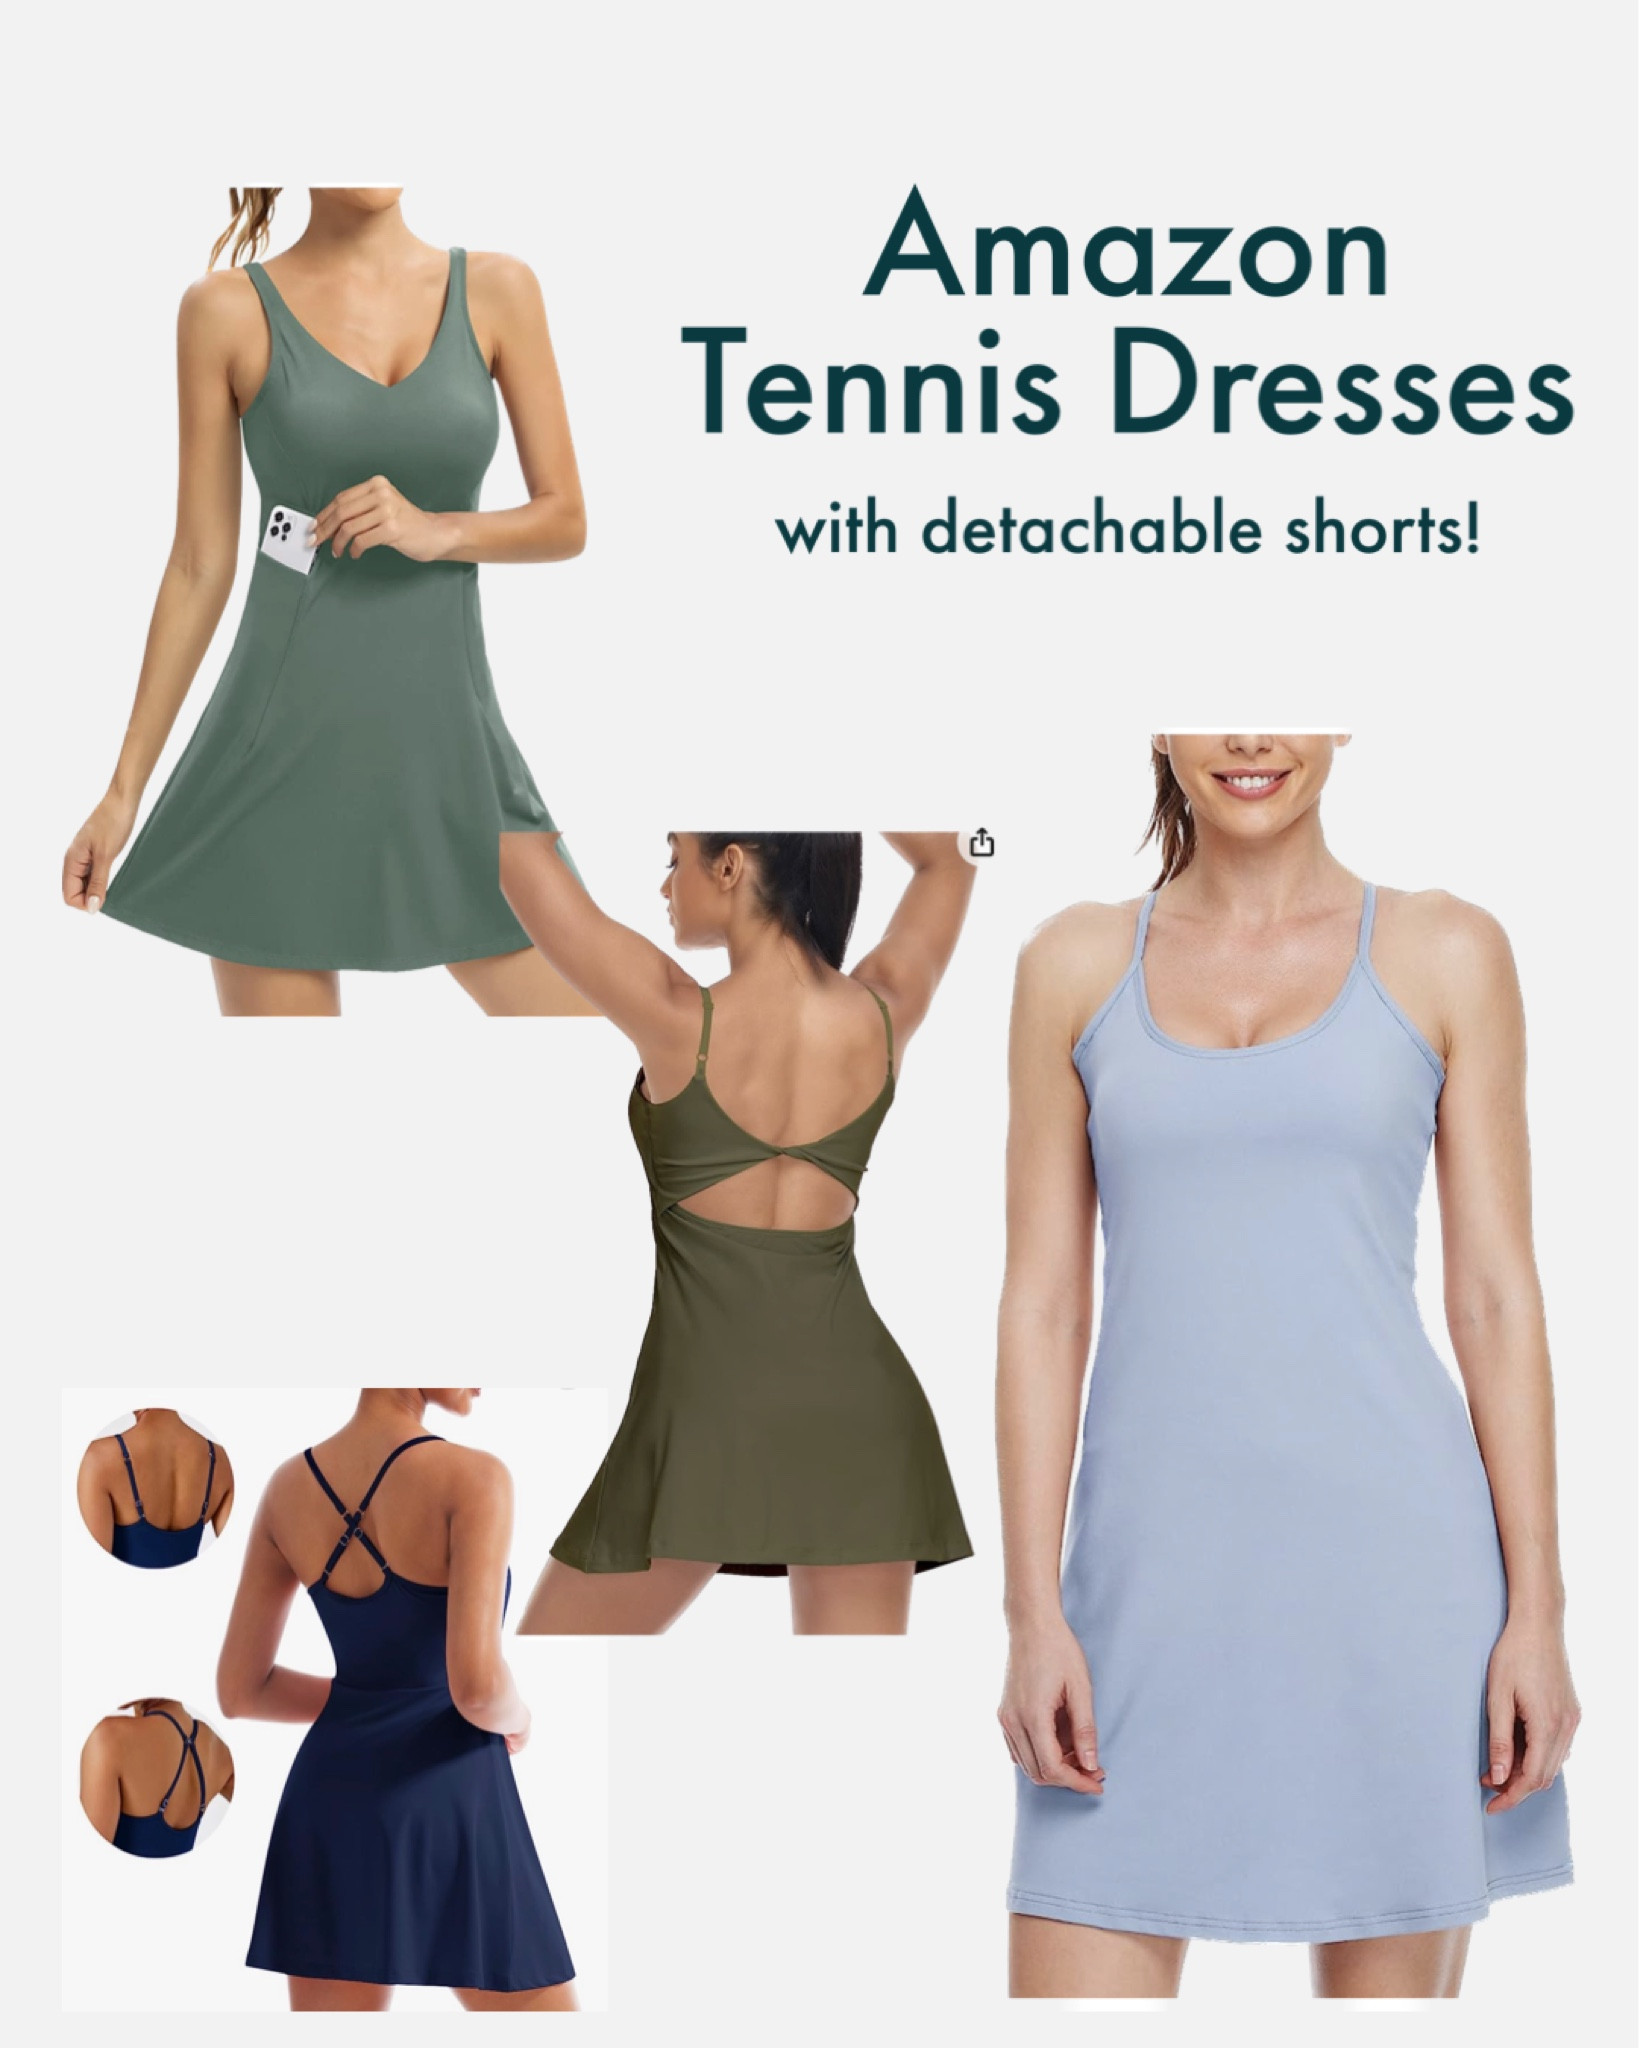 Fengbay Tennis Dress for Women,Golf Dresses with Built in Shorts